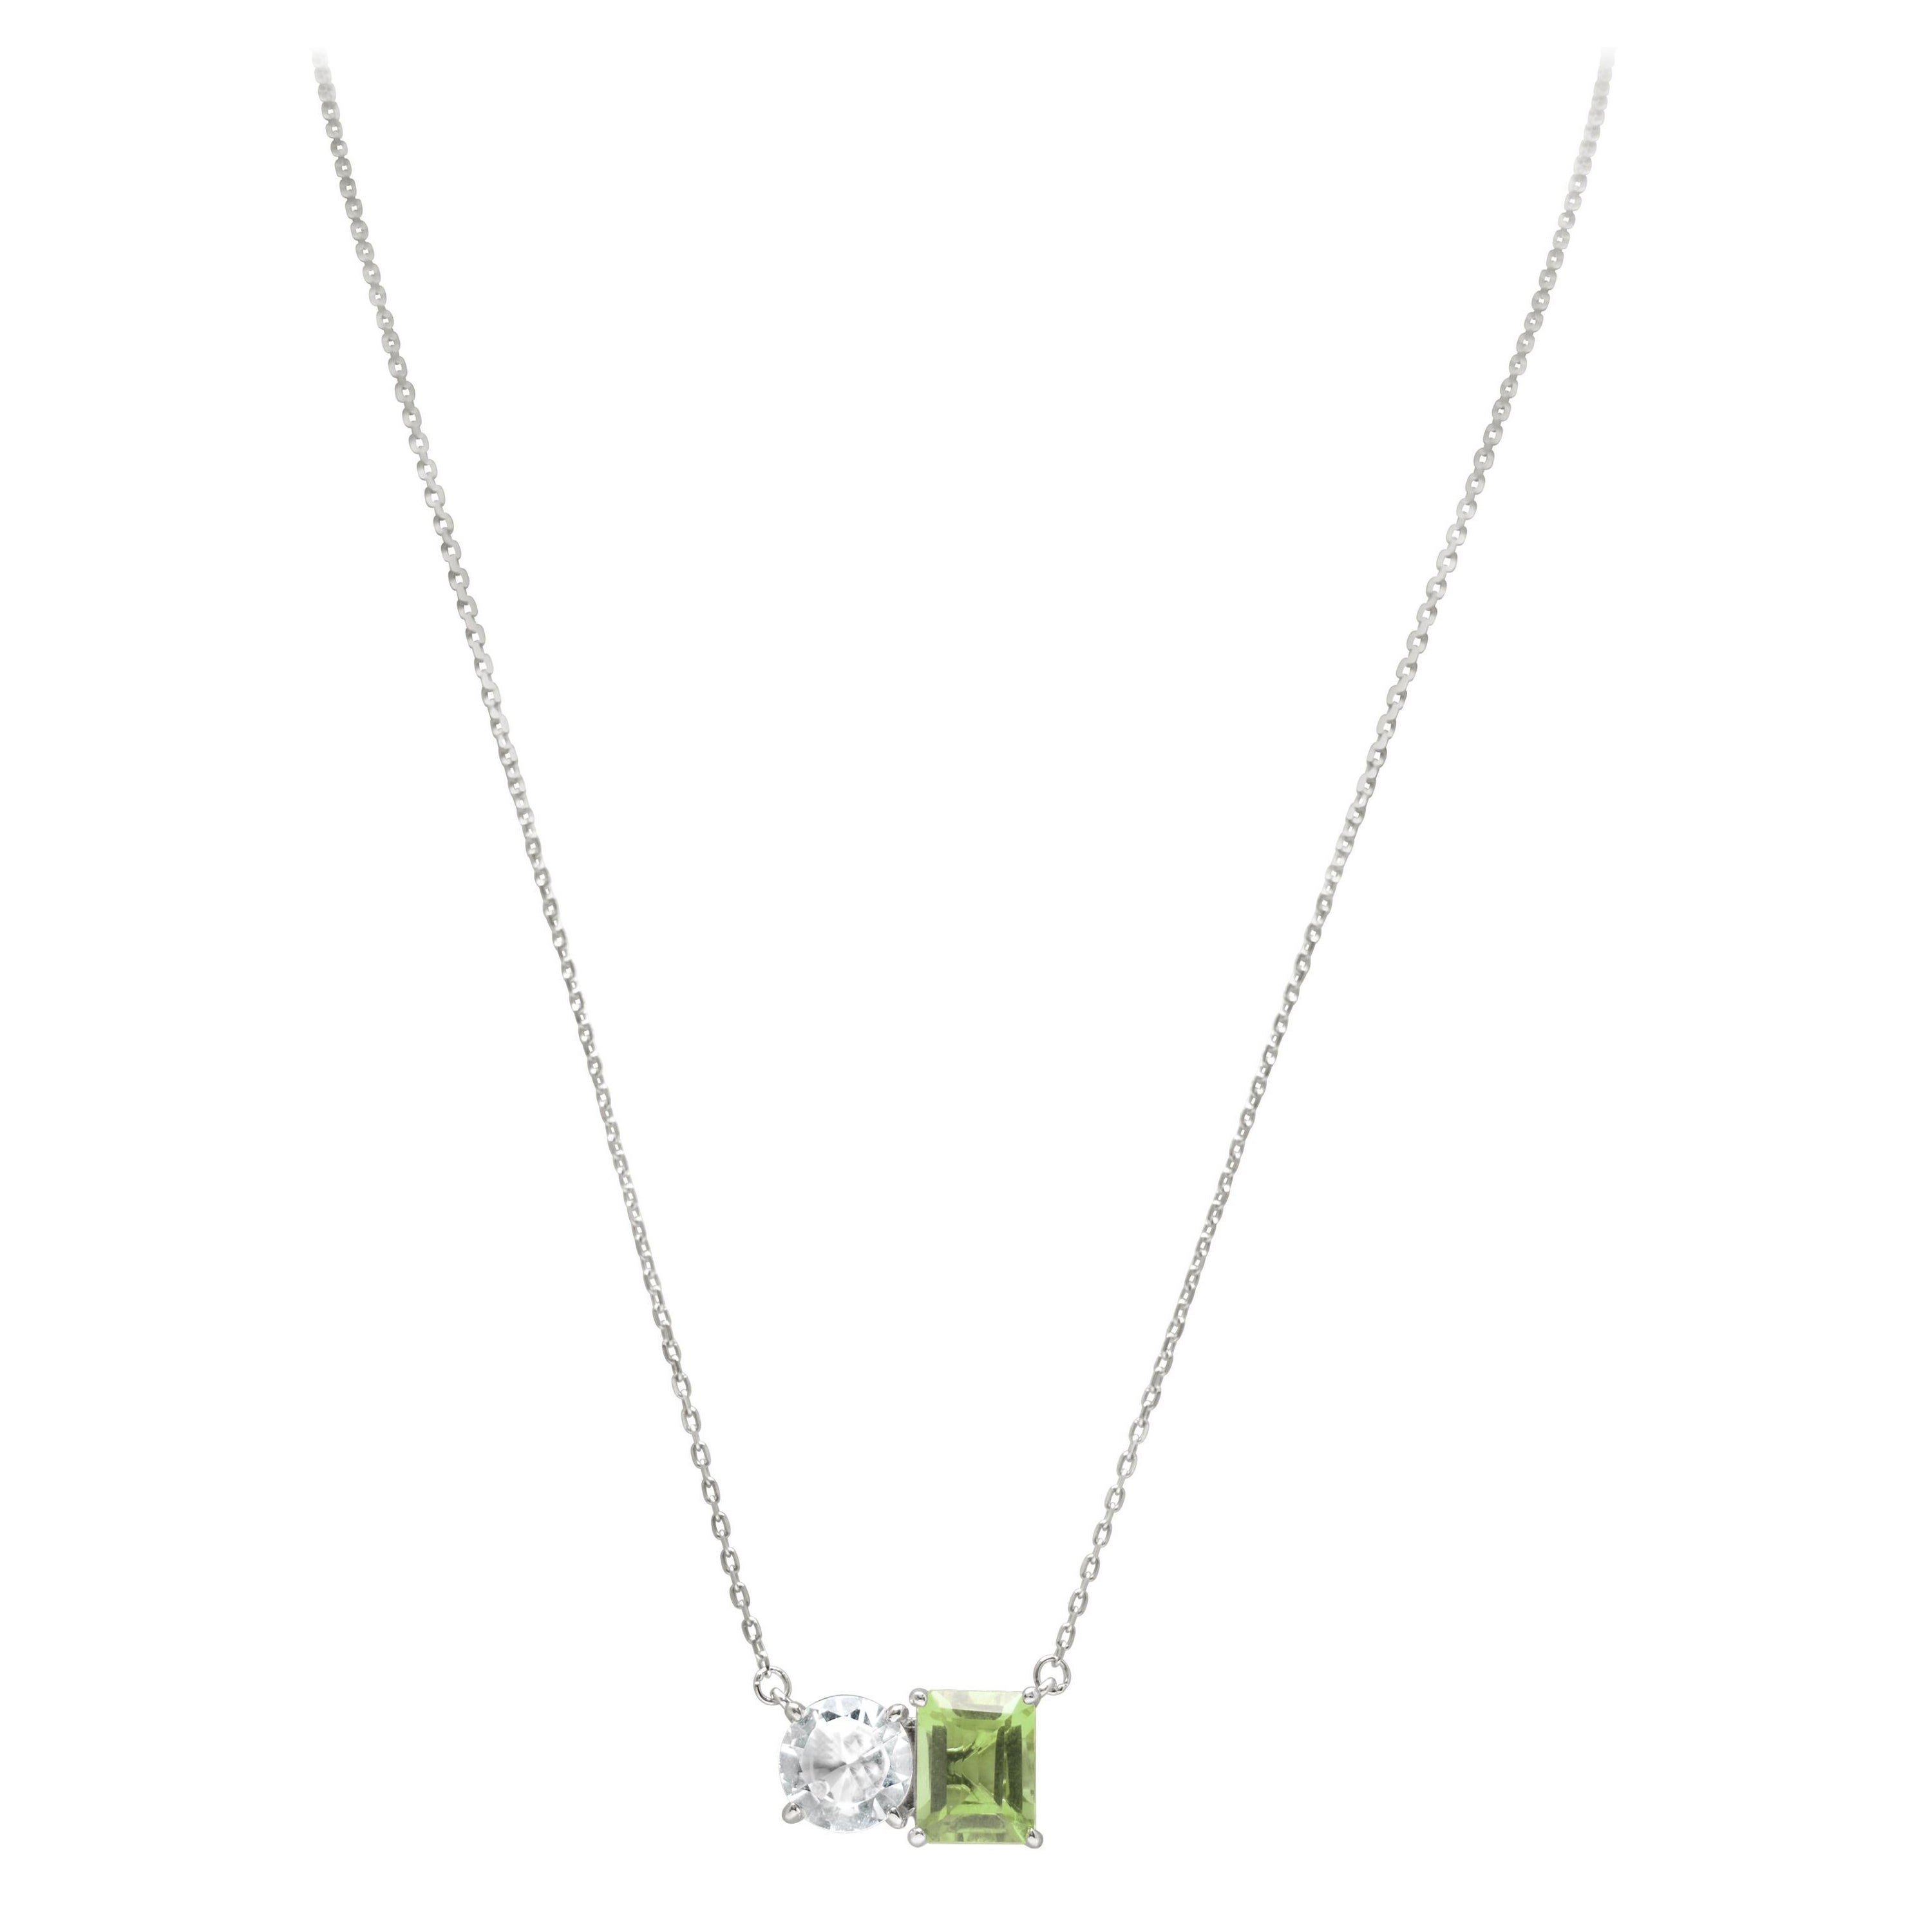 Suzy Levian Sterling Silver White Topaz & Green Amethyst Two Stone Necklace